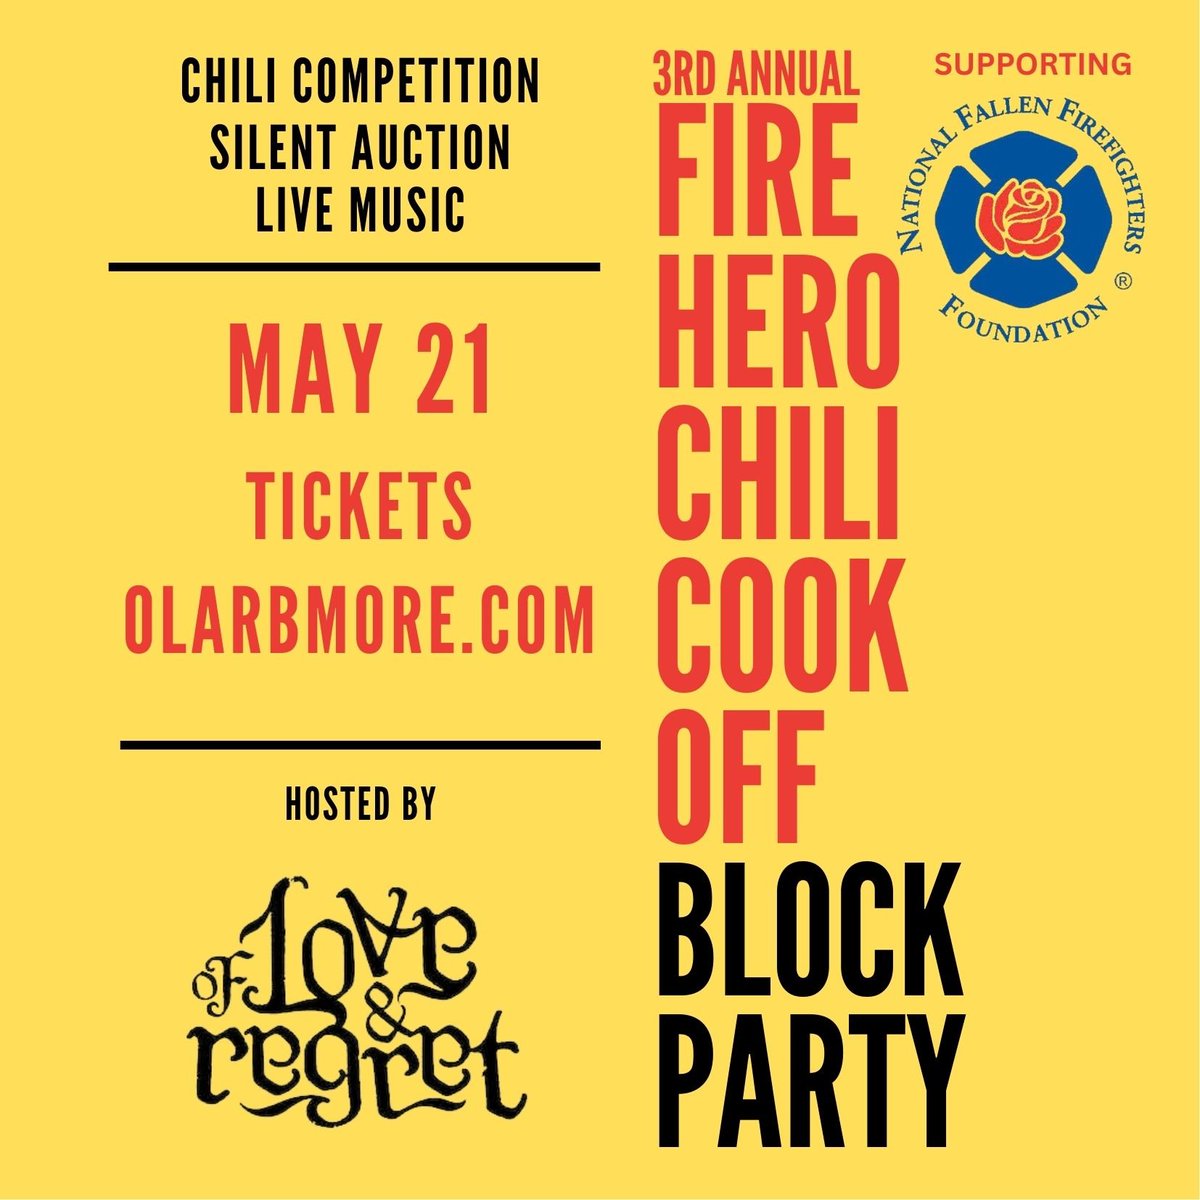 Join us on May 21st for our 3rd Annual Fire Hero Chili Cook-Off at Love & Regret. Enjoy chili, music, and family fun starting at 12PM. First Responders and Veterans, claim your free tickets at olarbmore.com/chilicookoff/. Thank you for your service.